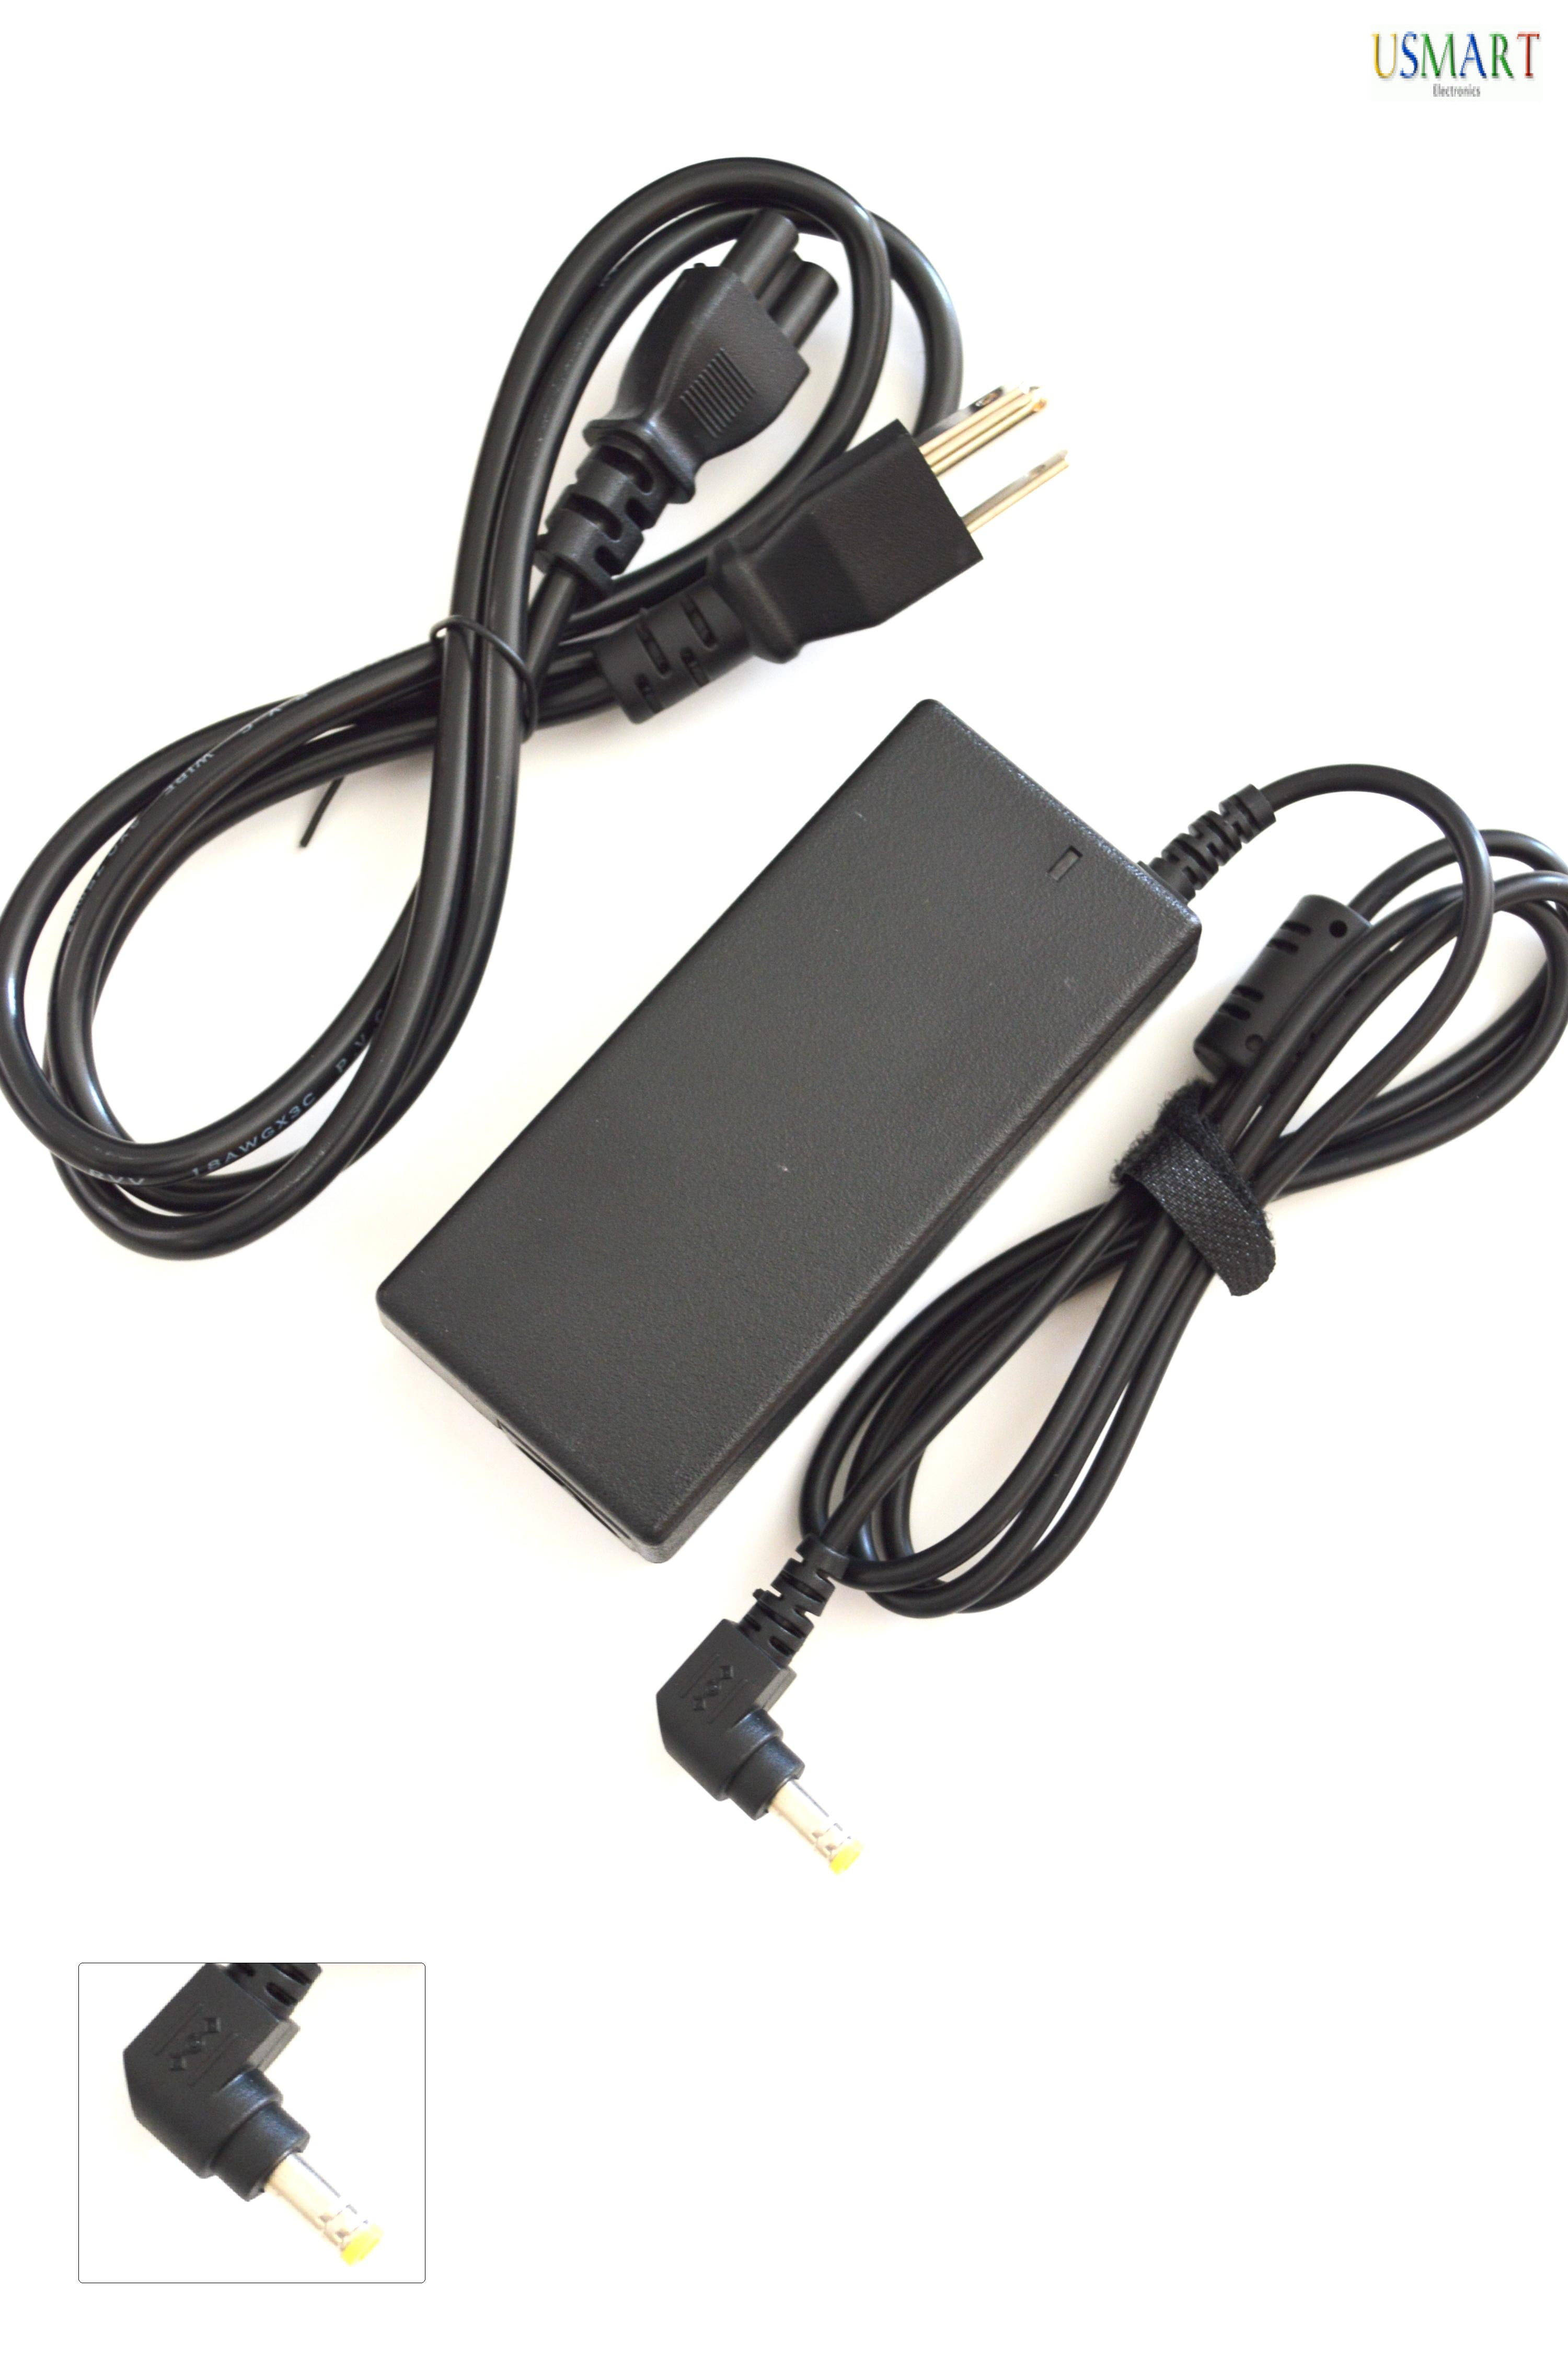 New AC Power Adapter Laptop Charger For Asus R556L Laptop Notebook Chromebook PC Supply Cord 3 warranty - Walmart.com